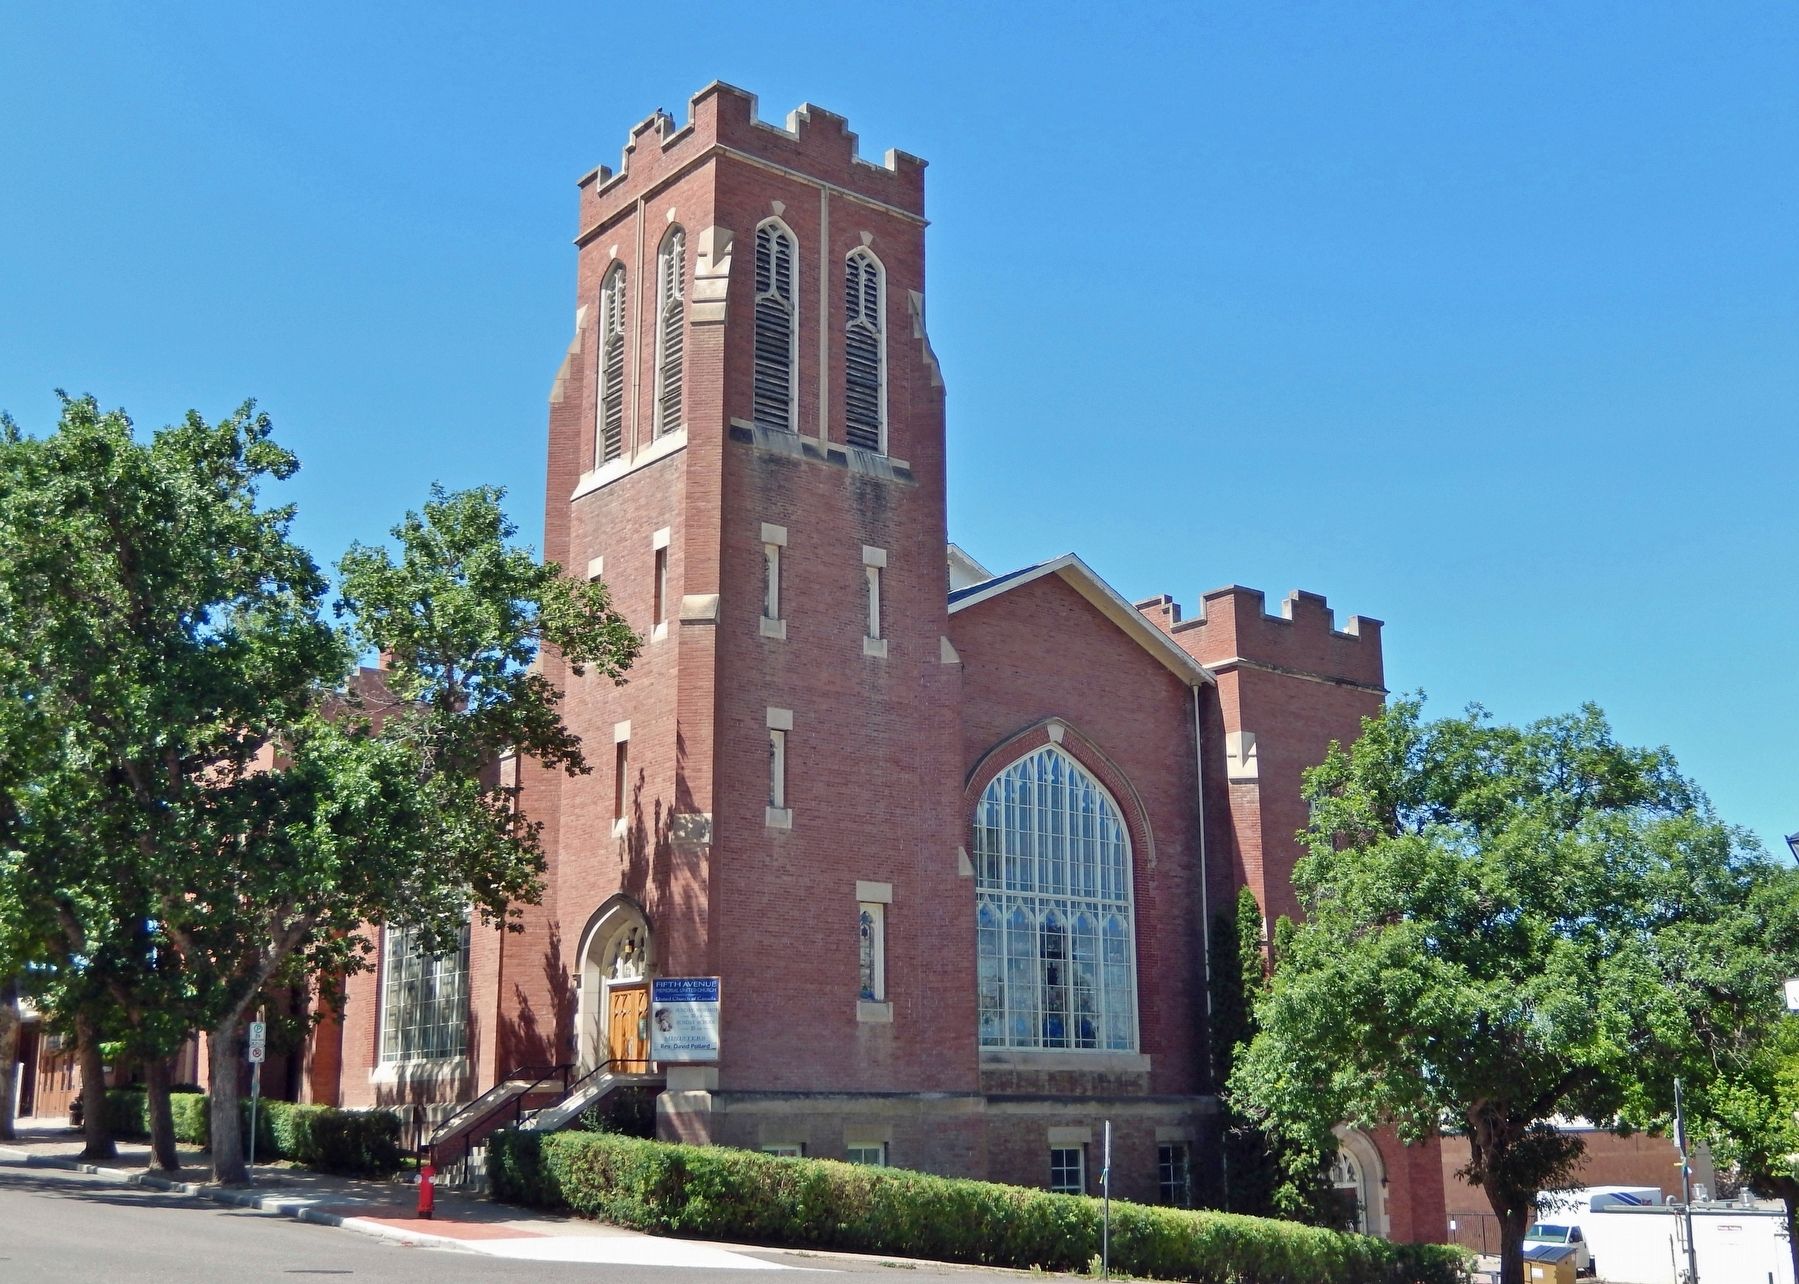 Fifth Avenue Memorial United Church (<i>southeast elevation</i>) image. Click for full size.